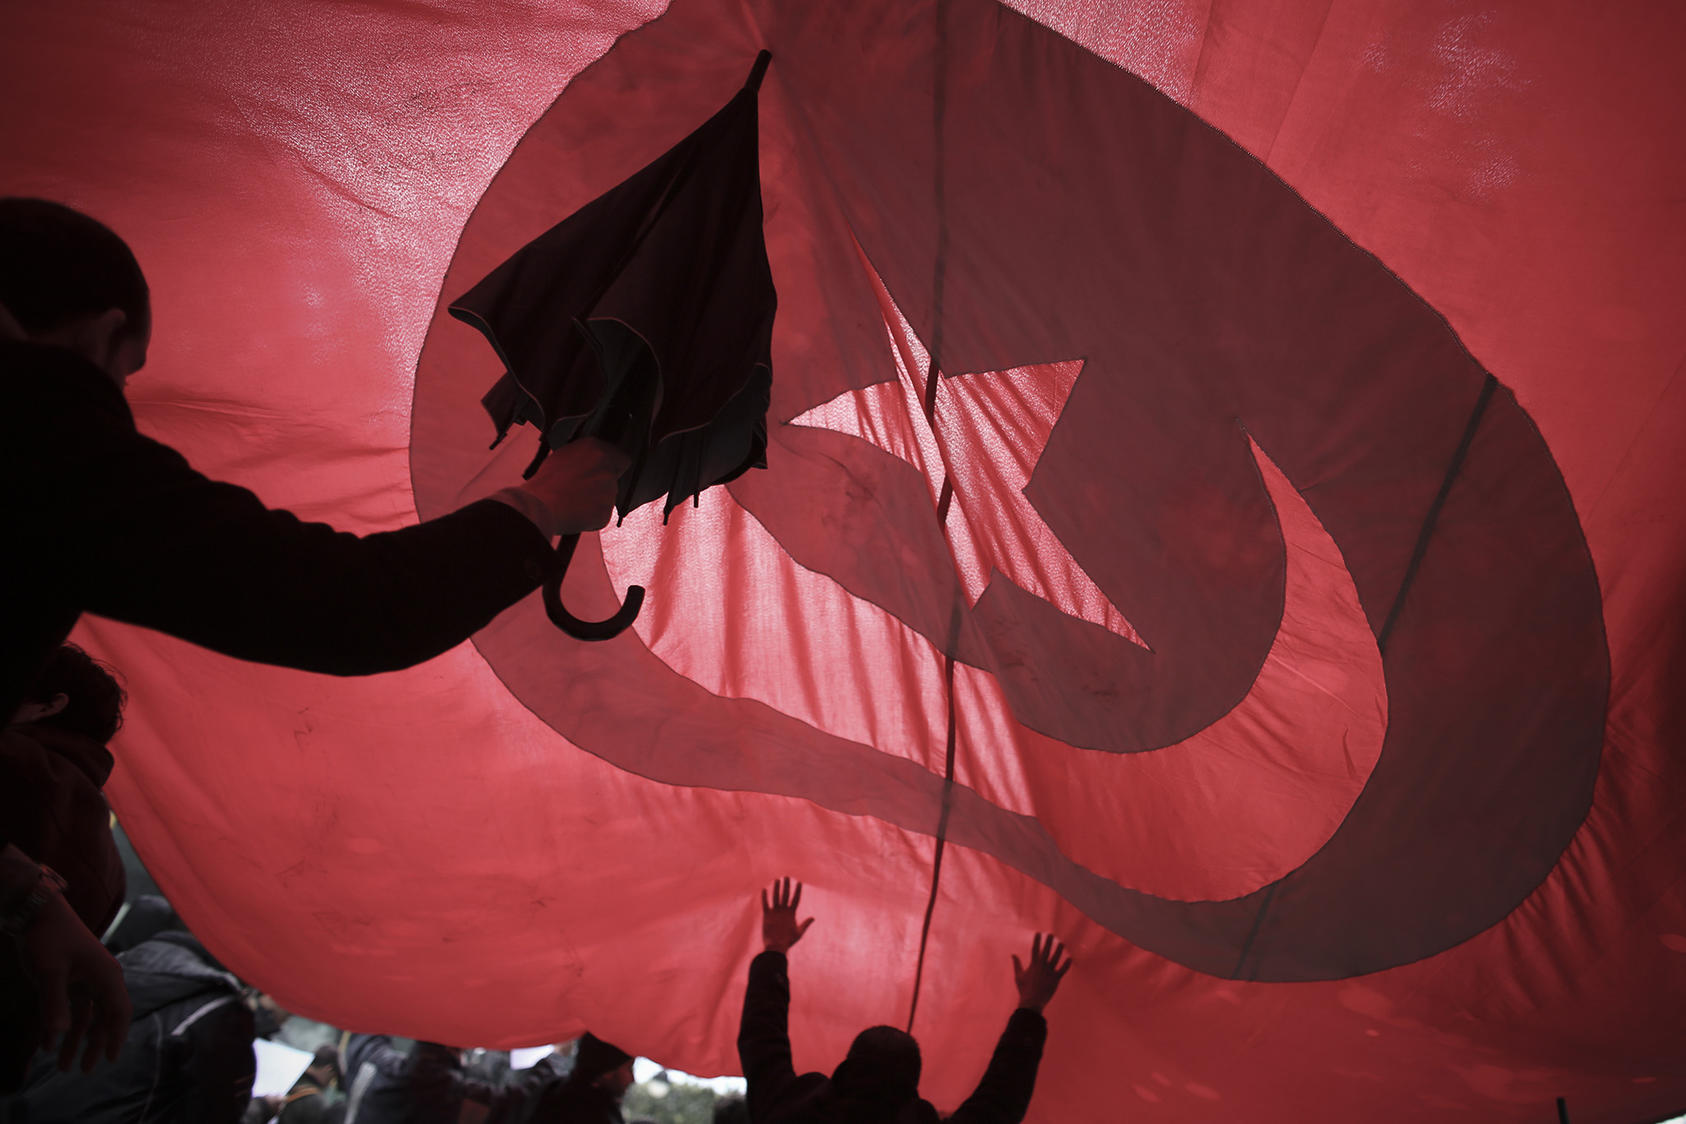 Under a Tunisian flag, government supporters rally in Tunis, Tunisia, Feb. 9, 2013. (Tara Todras-Whitehill/The New York Times)